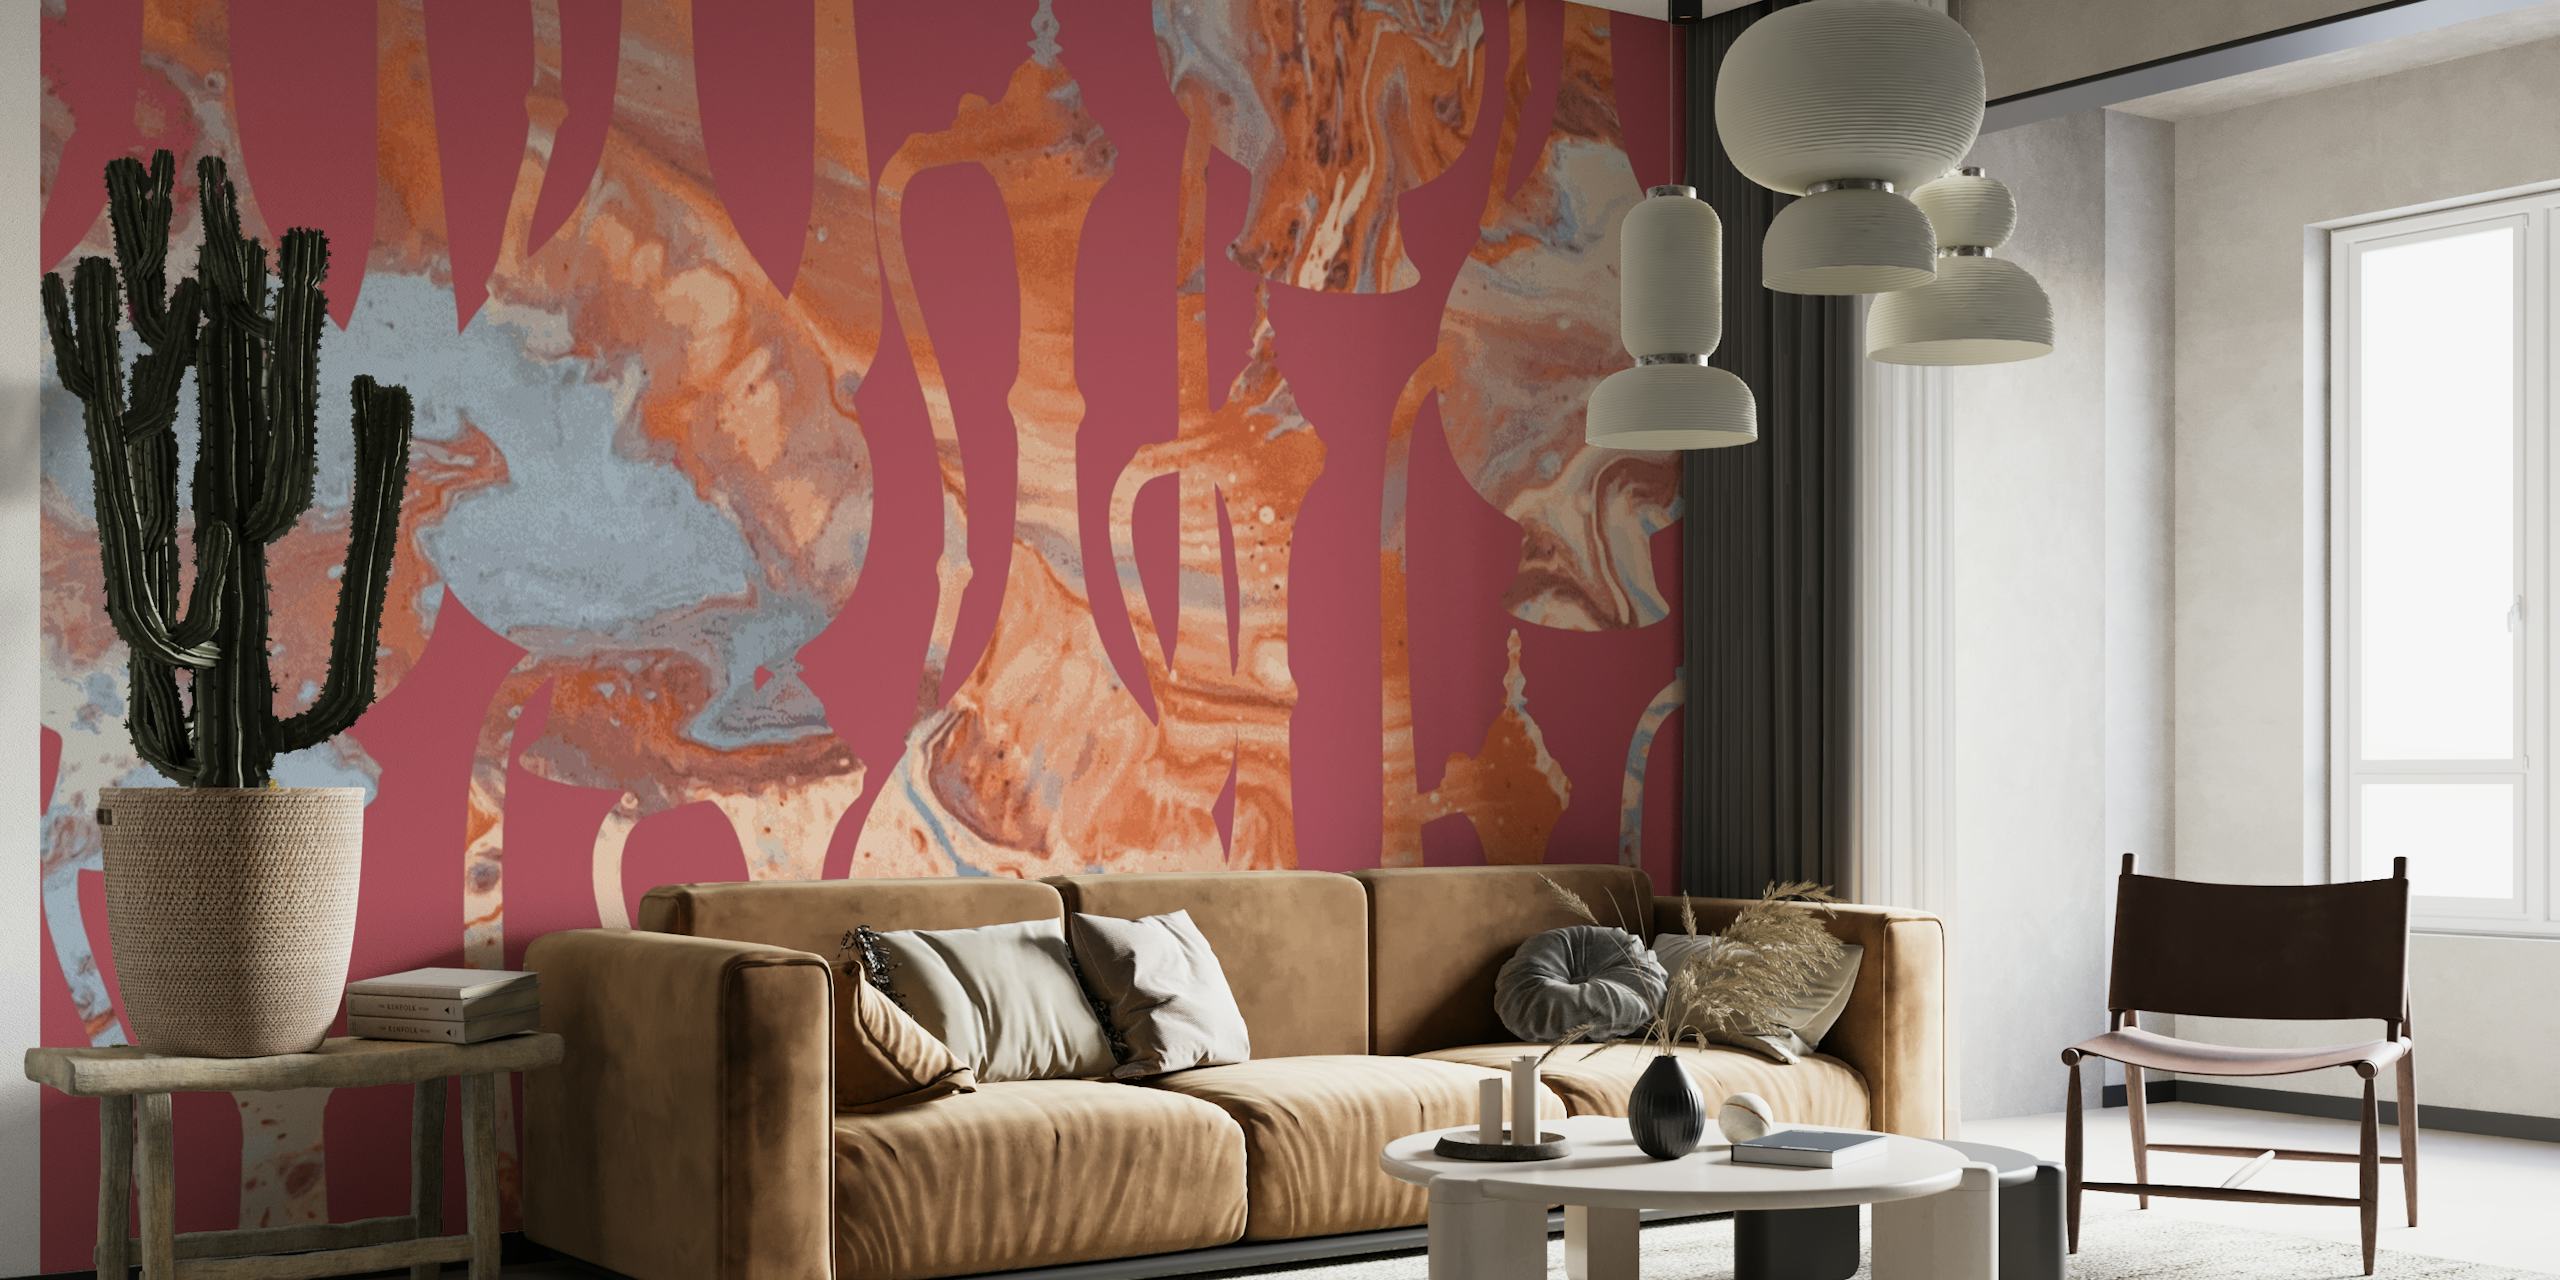 Abstract temple-themed wall mural with warm earth tones and ethereal shapes